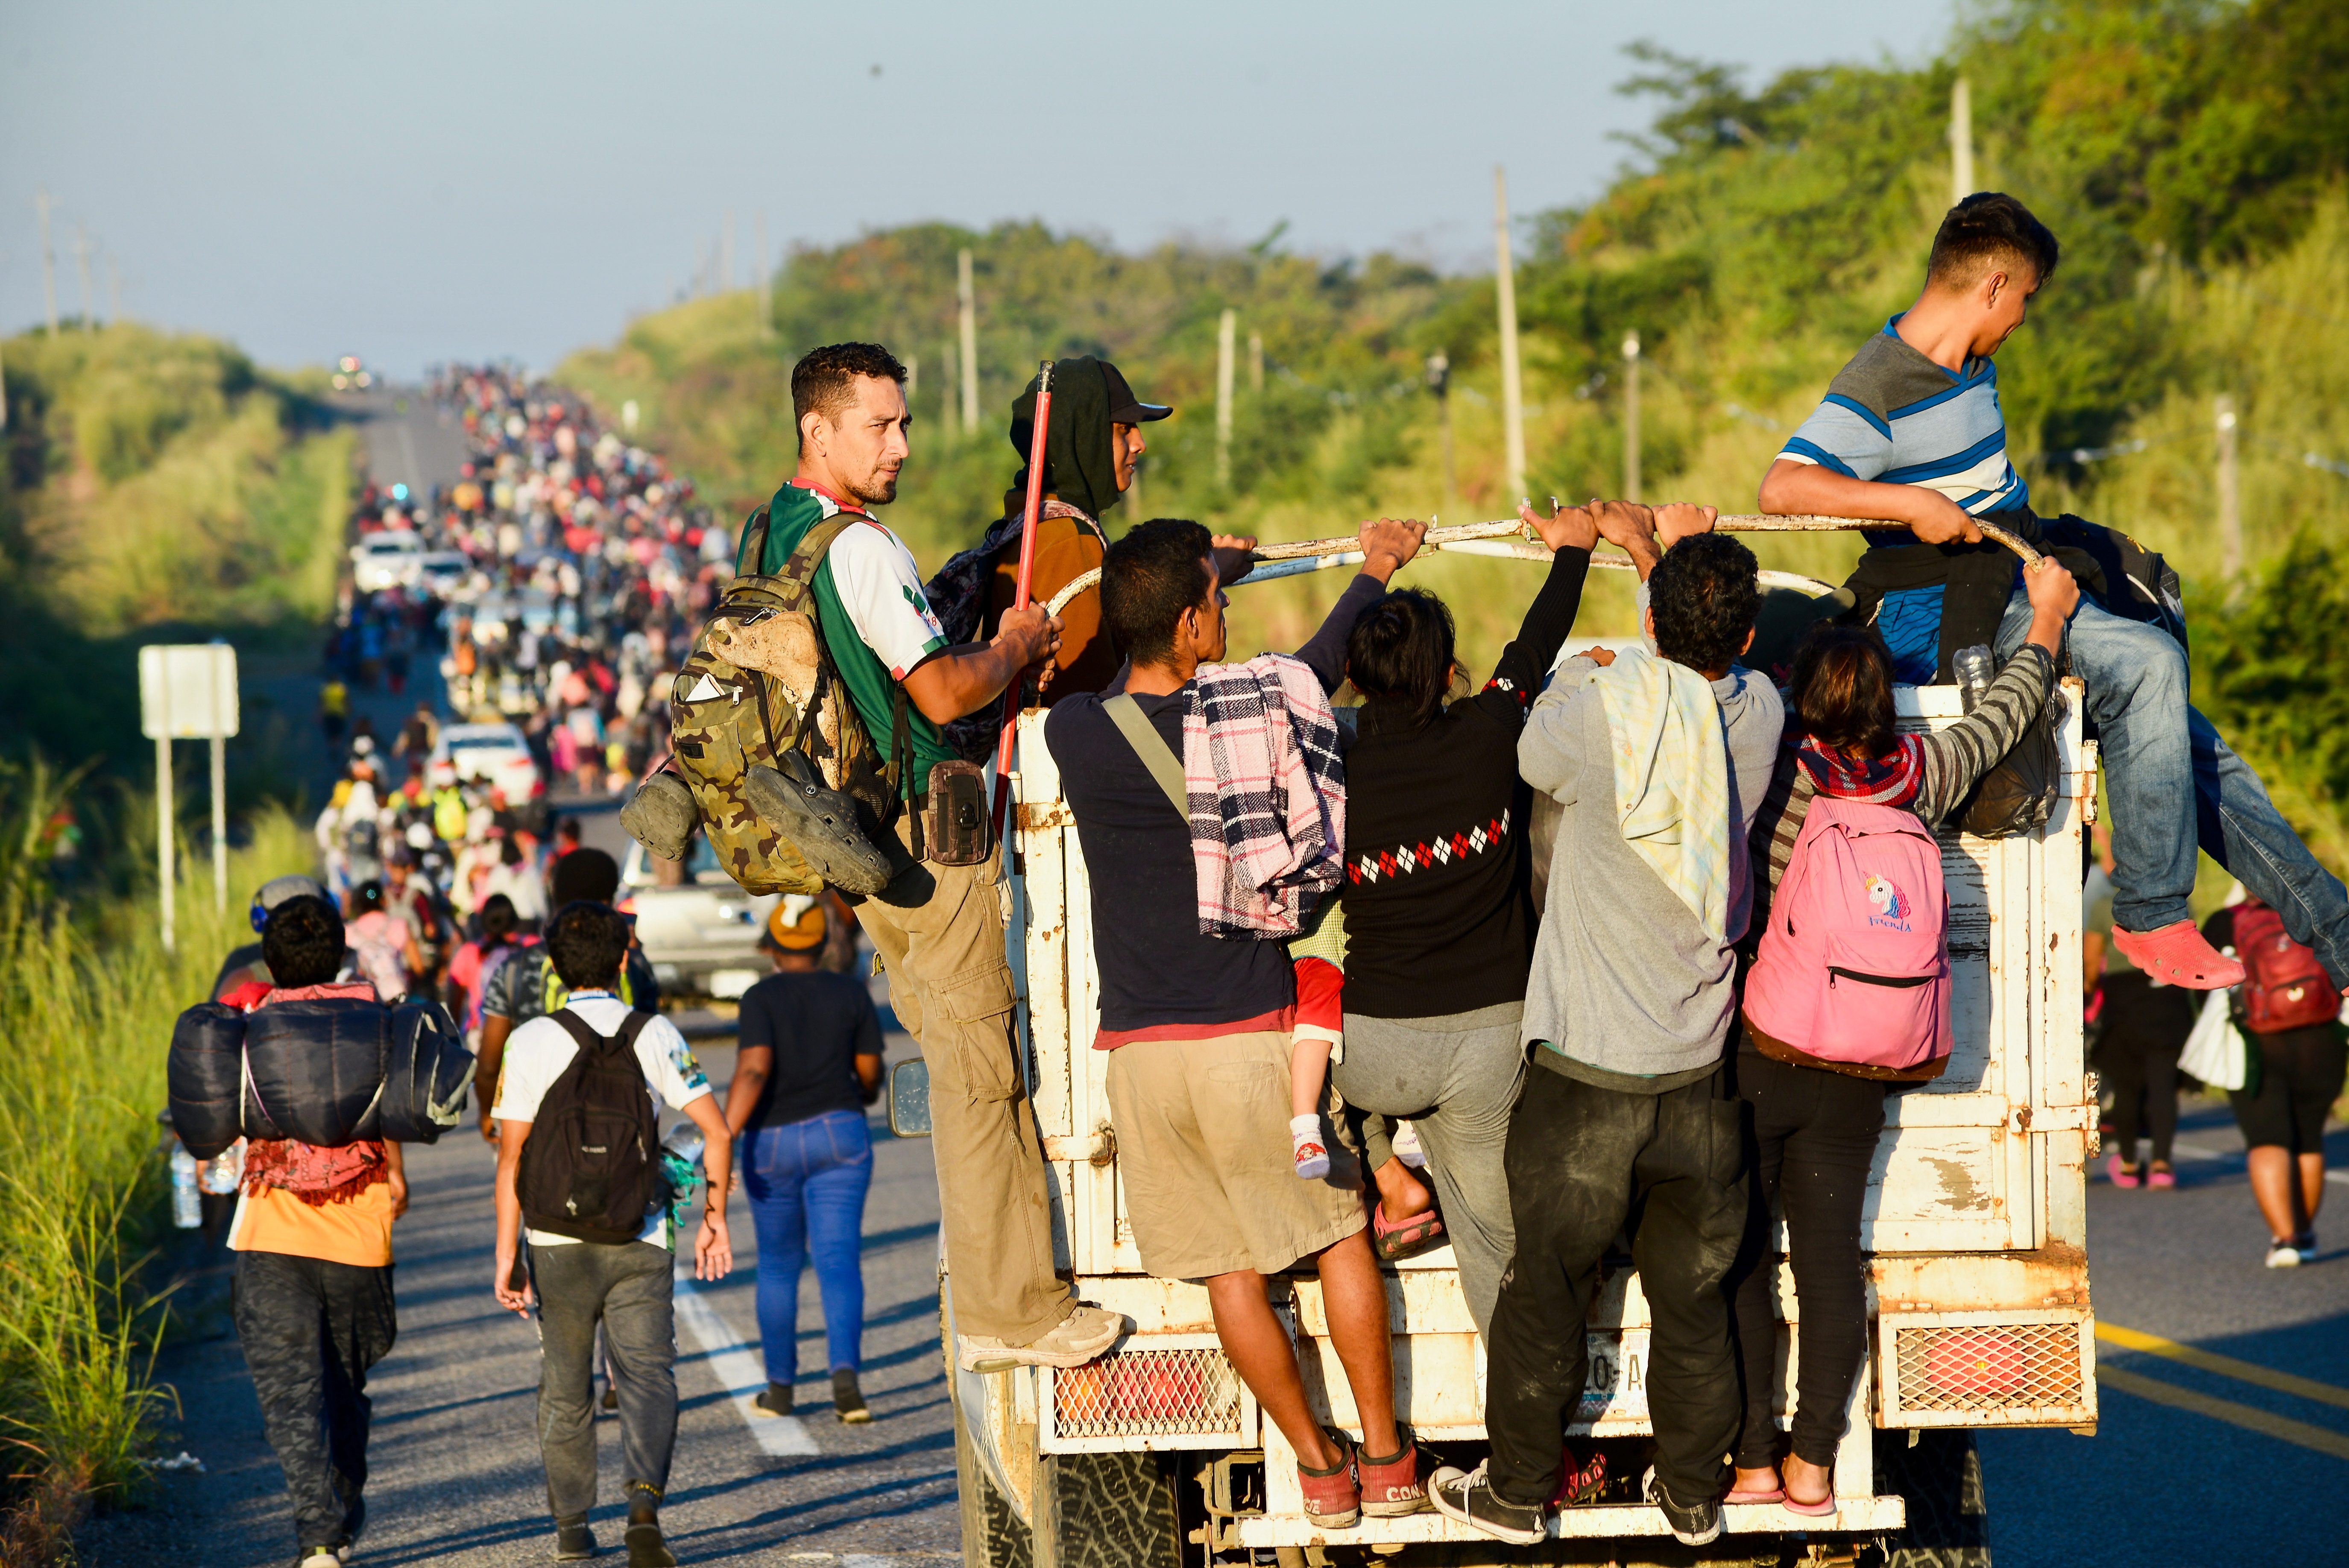 Over 1,500 migrants in Mexico caravan regularized, government says